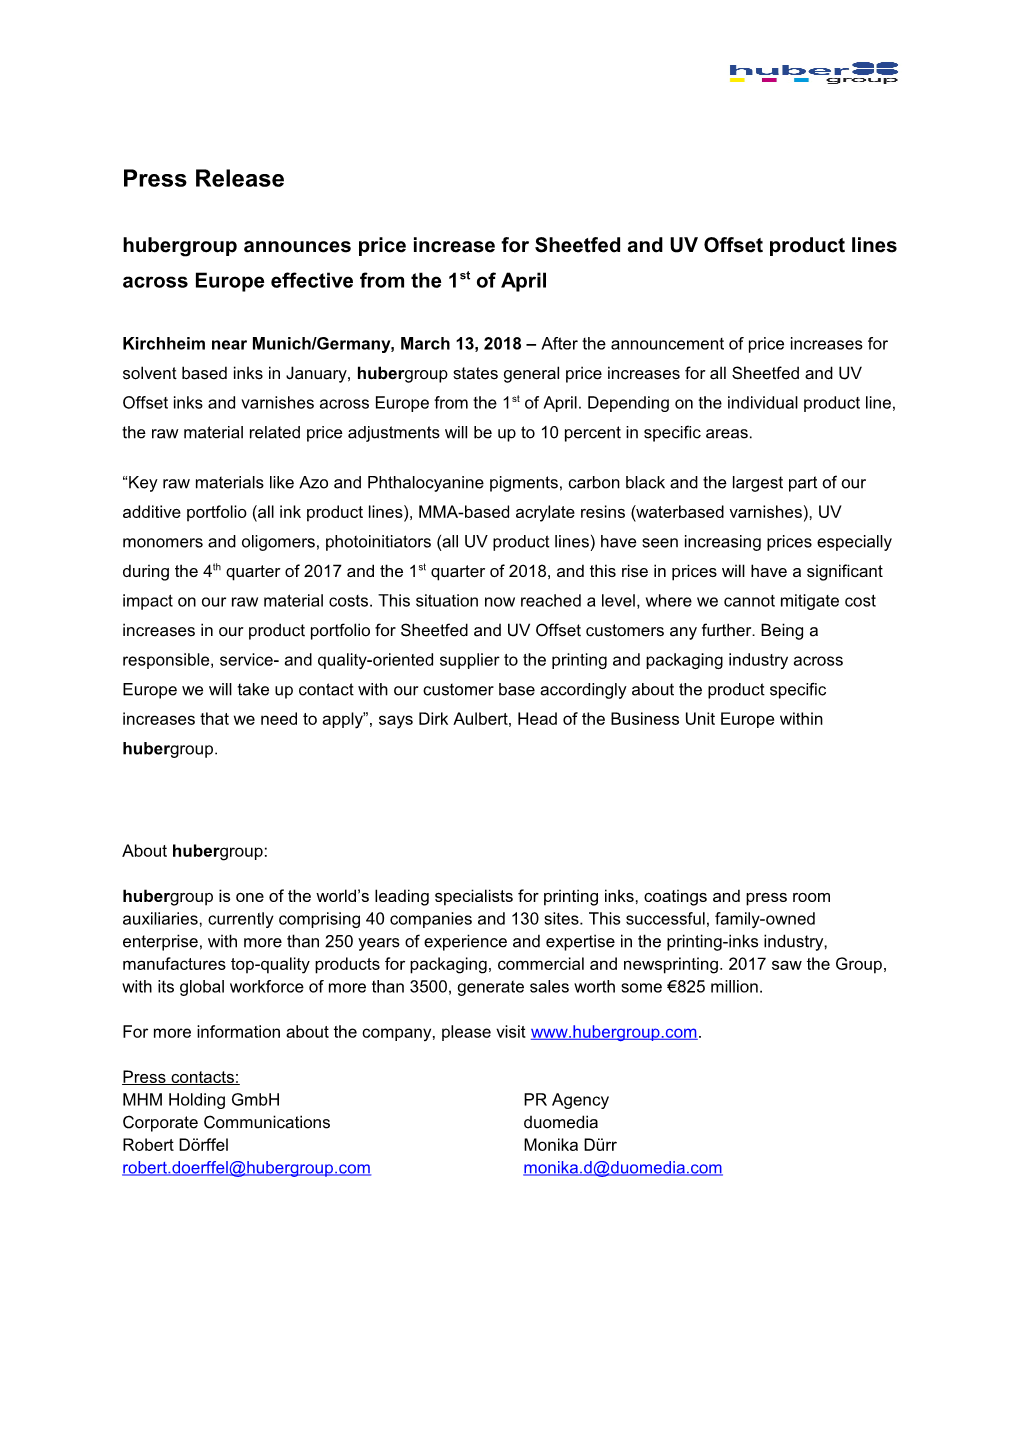 Hubergroup Announces Price Increase for Sheetfed and UV Offset Product Lines Across Europe